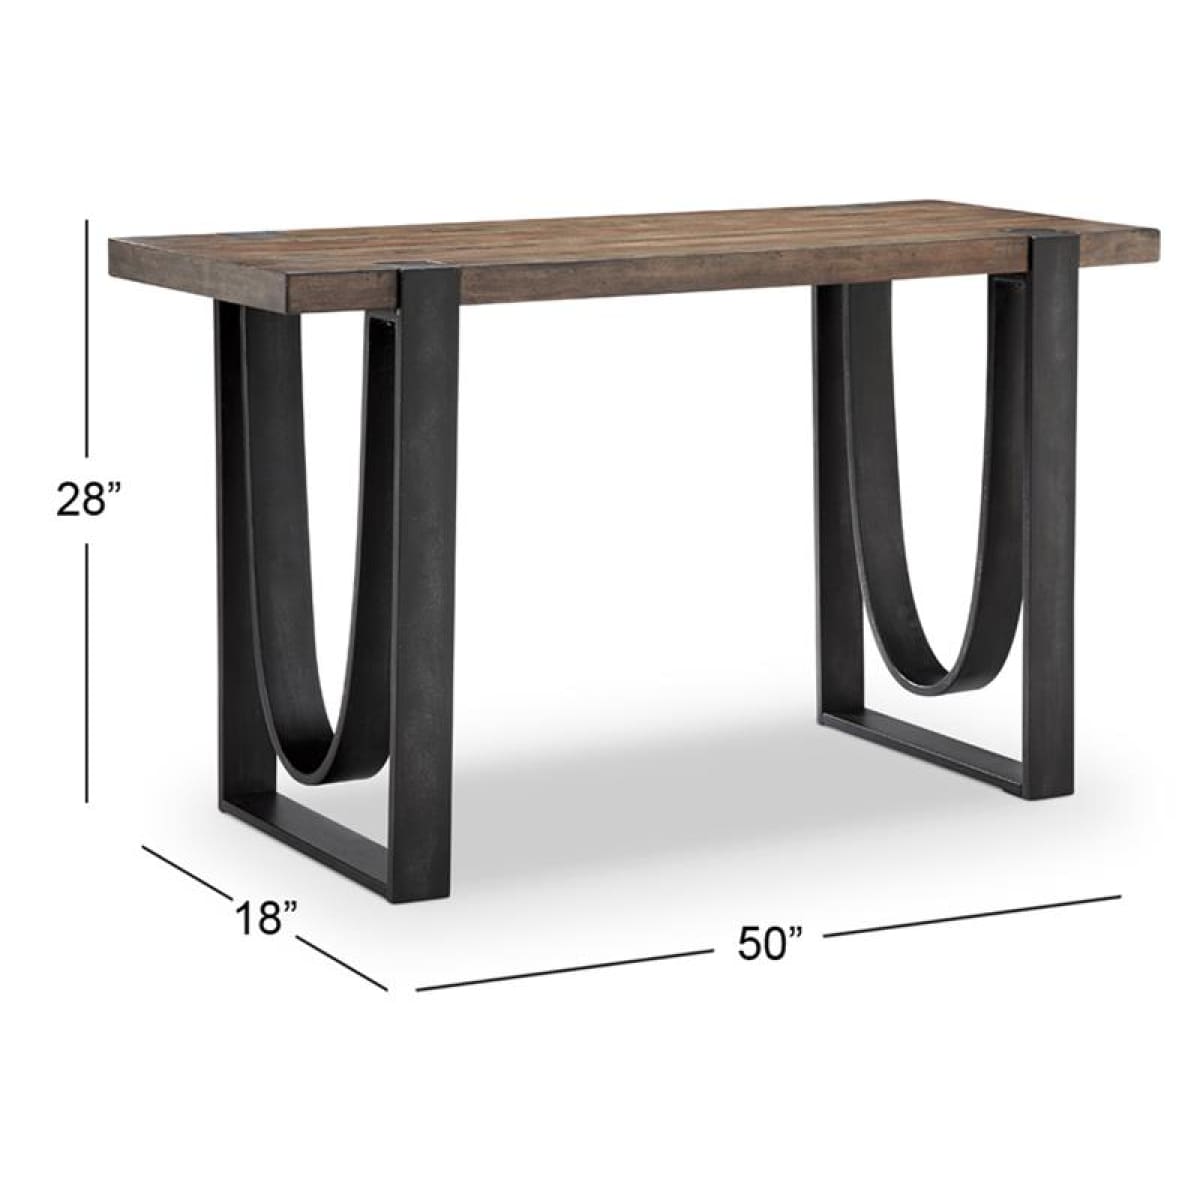 Bowden Coffee Table - COFFEE TABLE